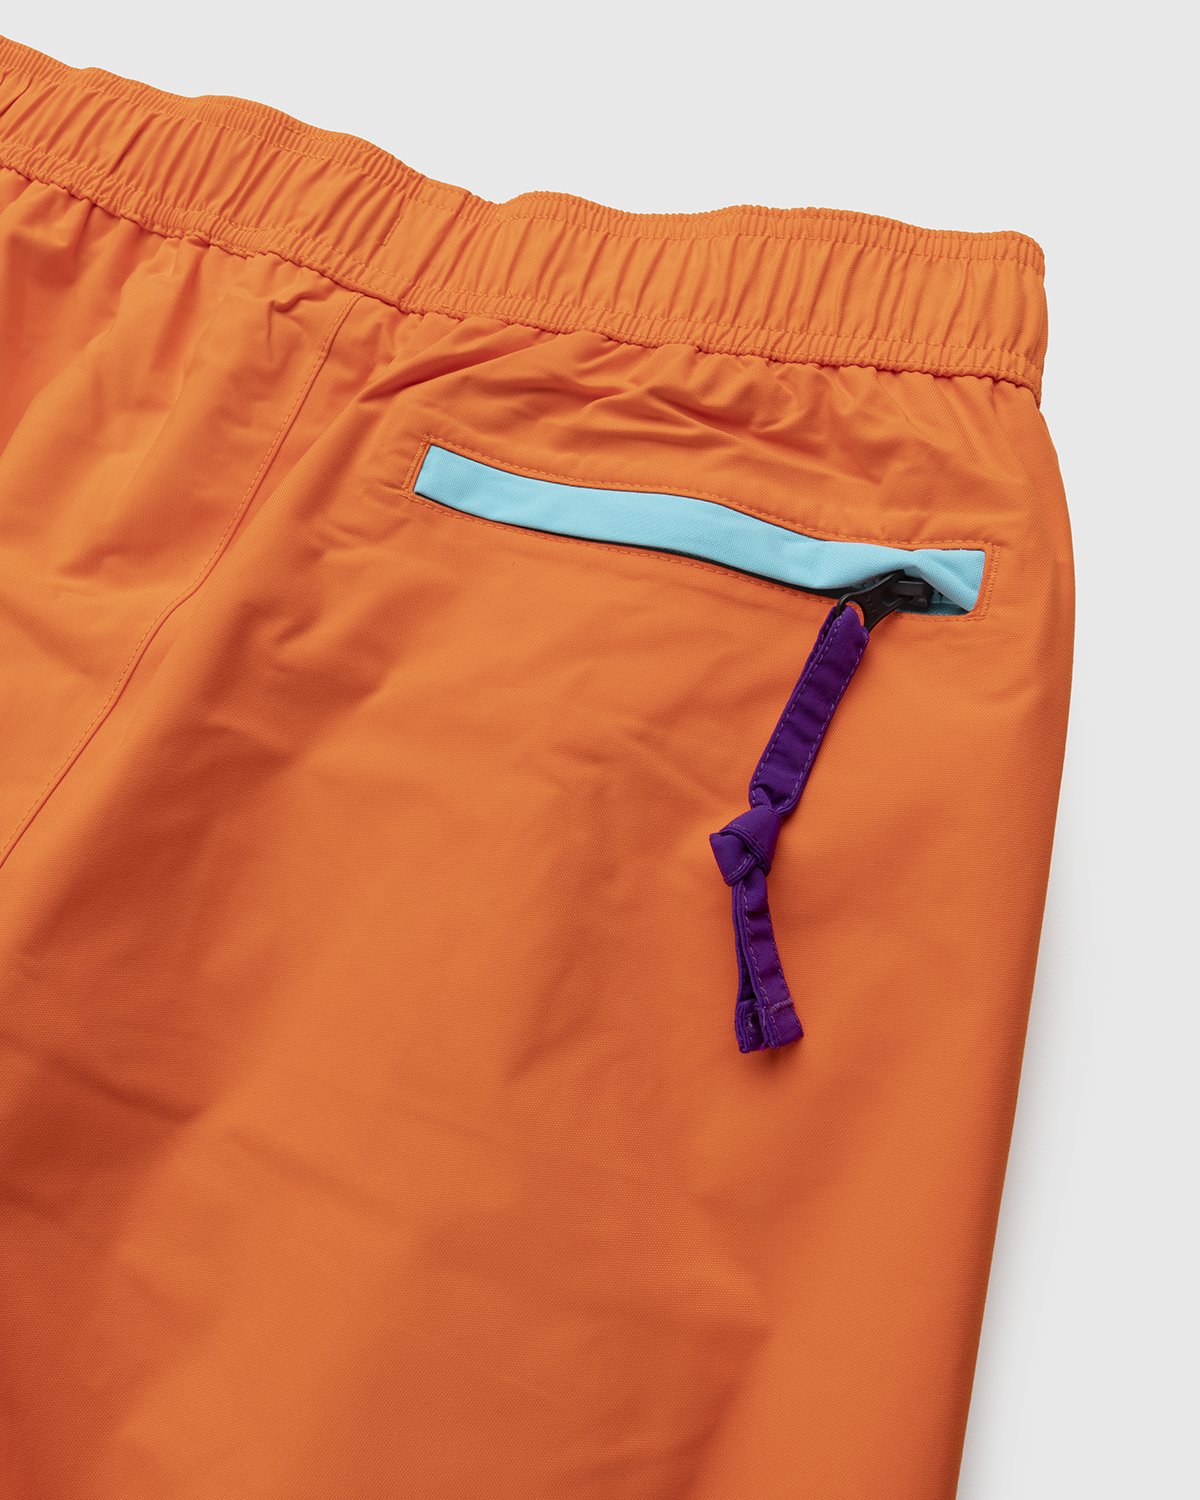 The North Face - Trans Antarctica Expedition Pant Red Orange - Clothing - Orange - Image 4